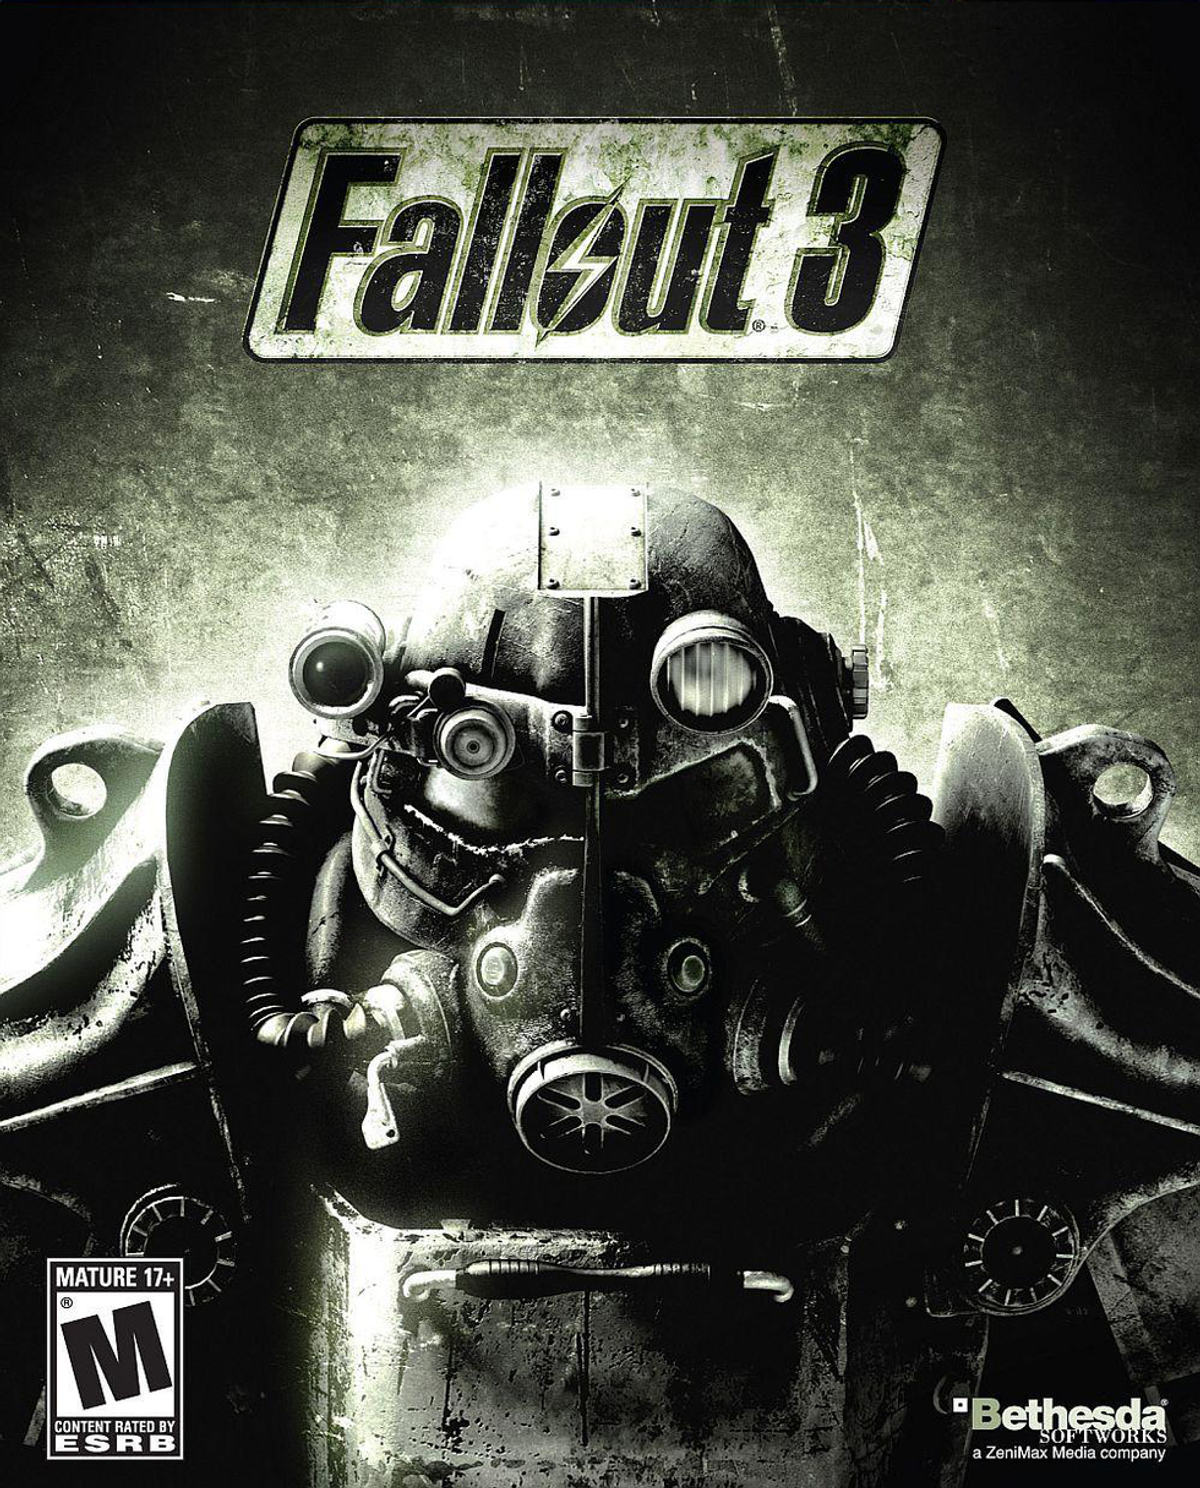 8 Reasons Why Fallout 3 Is Awesome